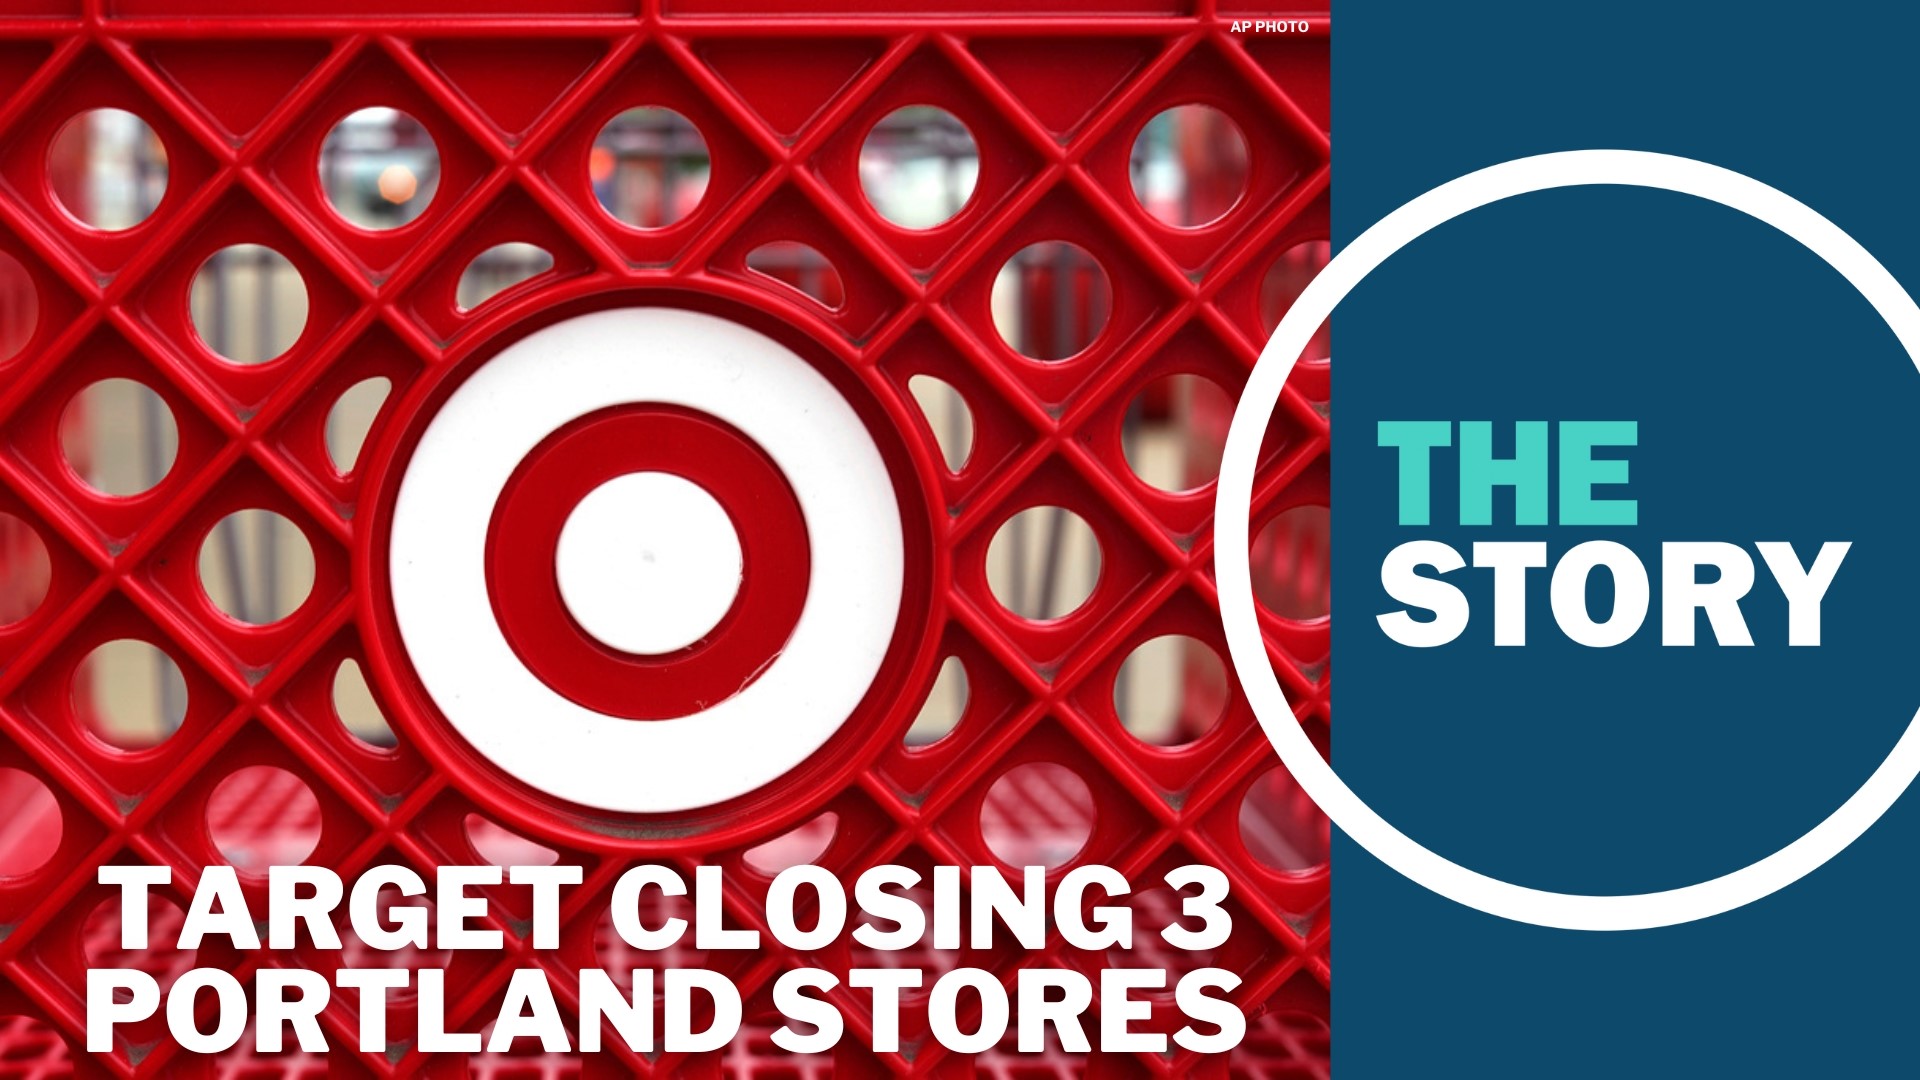 Target closes 3 Portland stores, citing theft and shoplifting